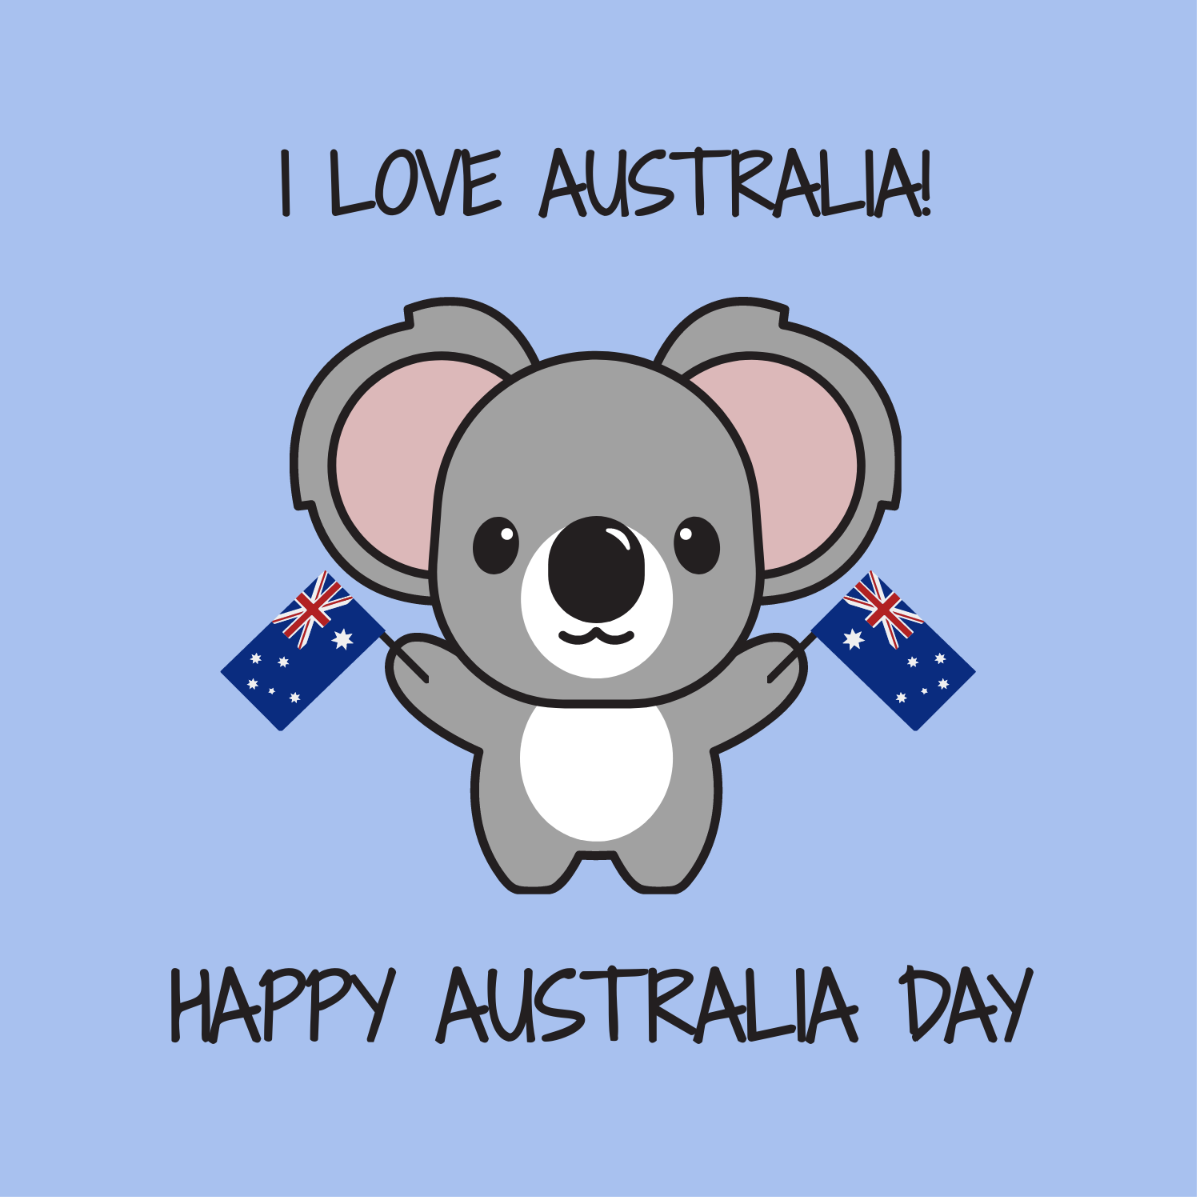 Australia Day Wishes Vector Template